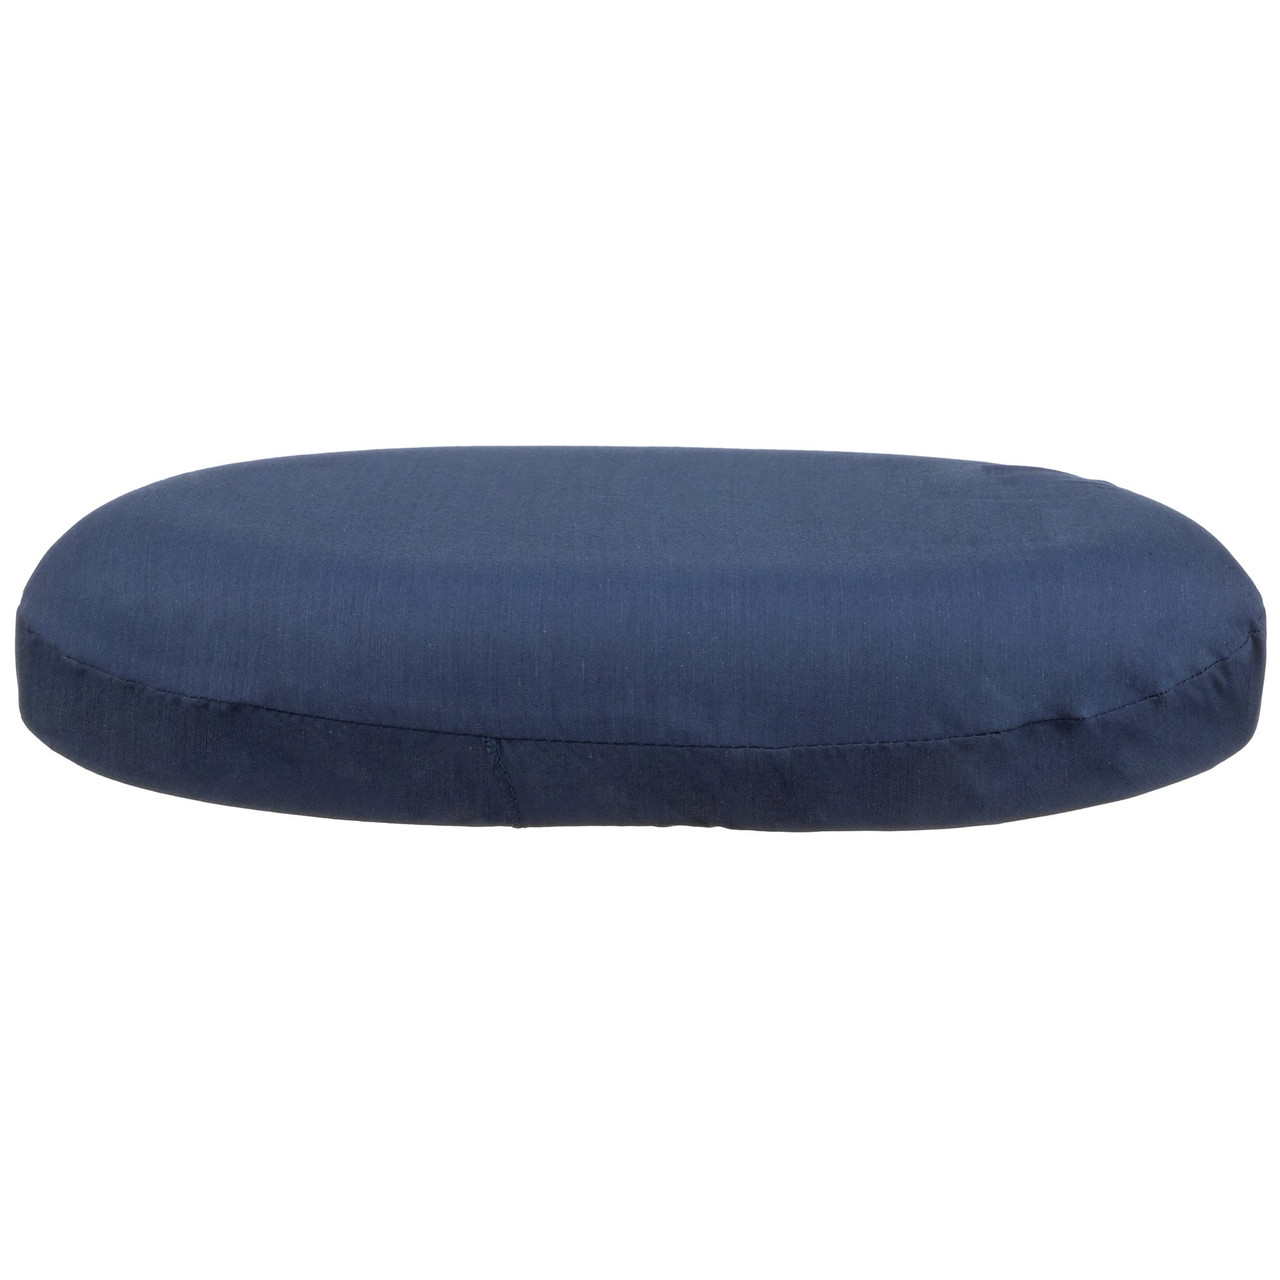 Molded Donut Cushion with Navy Cover - 14